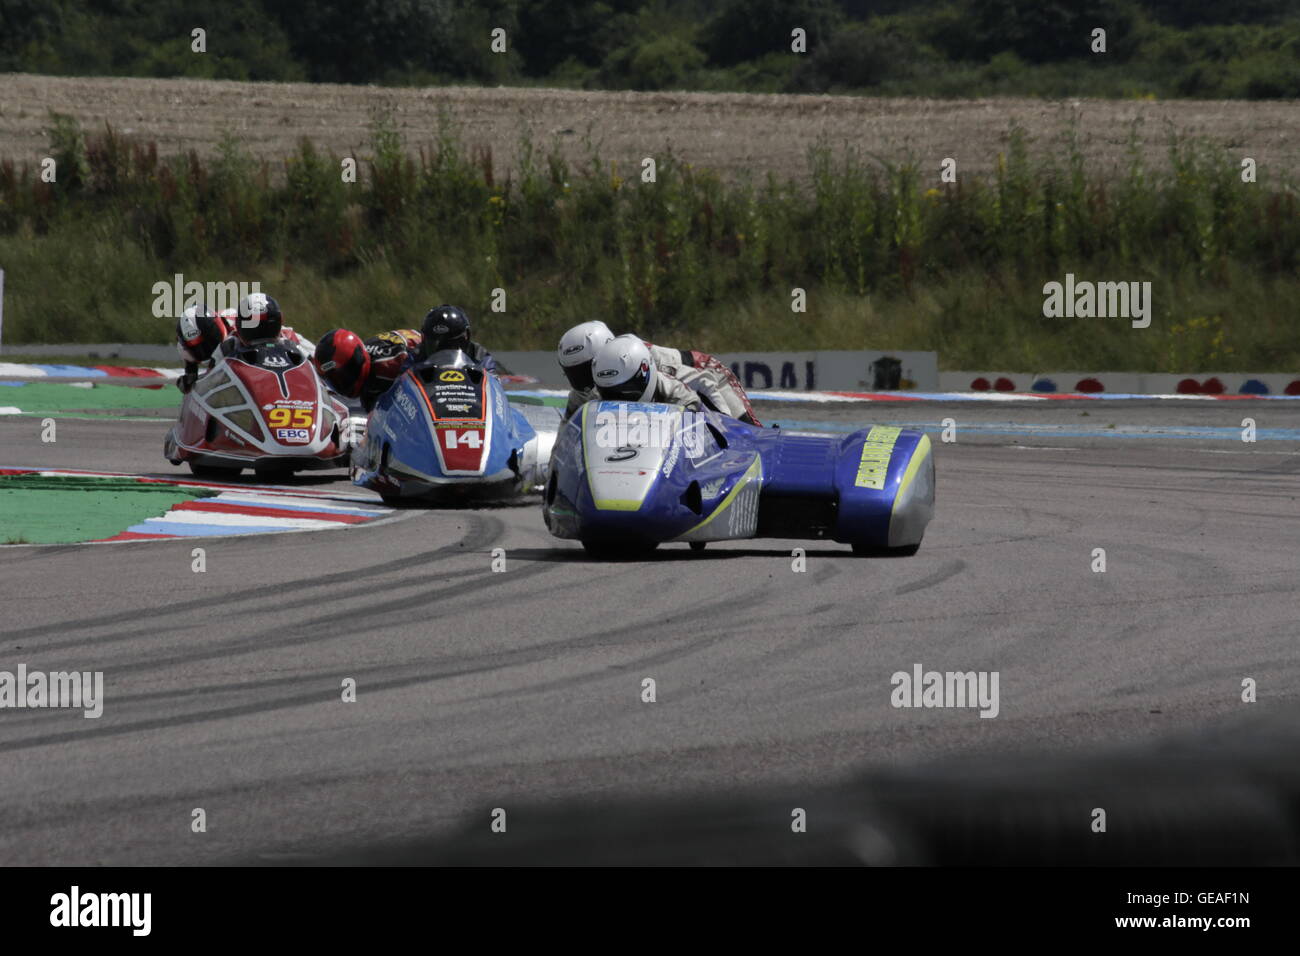 Rob Biggs/Ben Ransley, Alan Founds/Aki Alto and Lewis Blackstock/Patrick Rosney. riding in the qualifying rounds of the Hyundai Heavy Industries British Sidecars at Thruxton 23 July 2016. Stock Photo